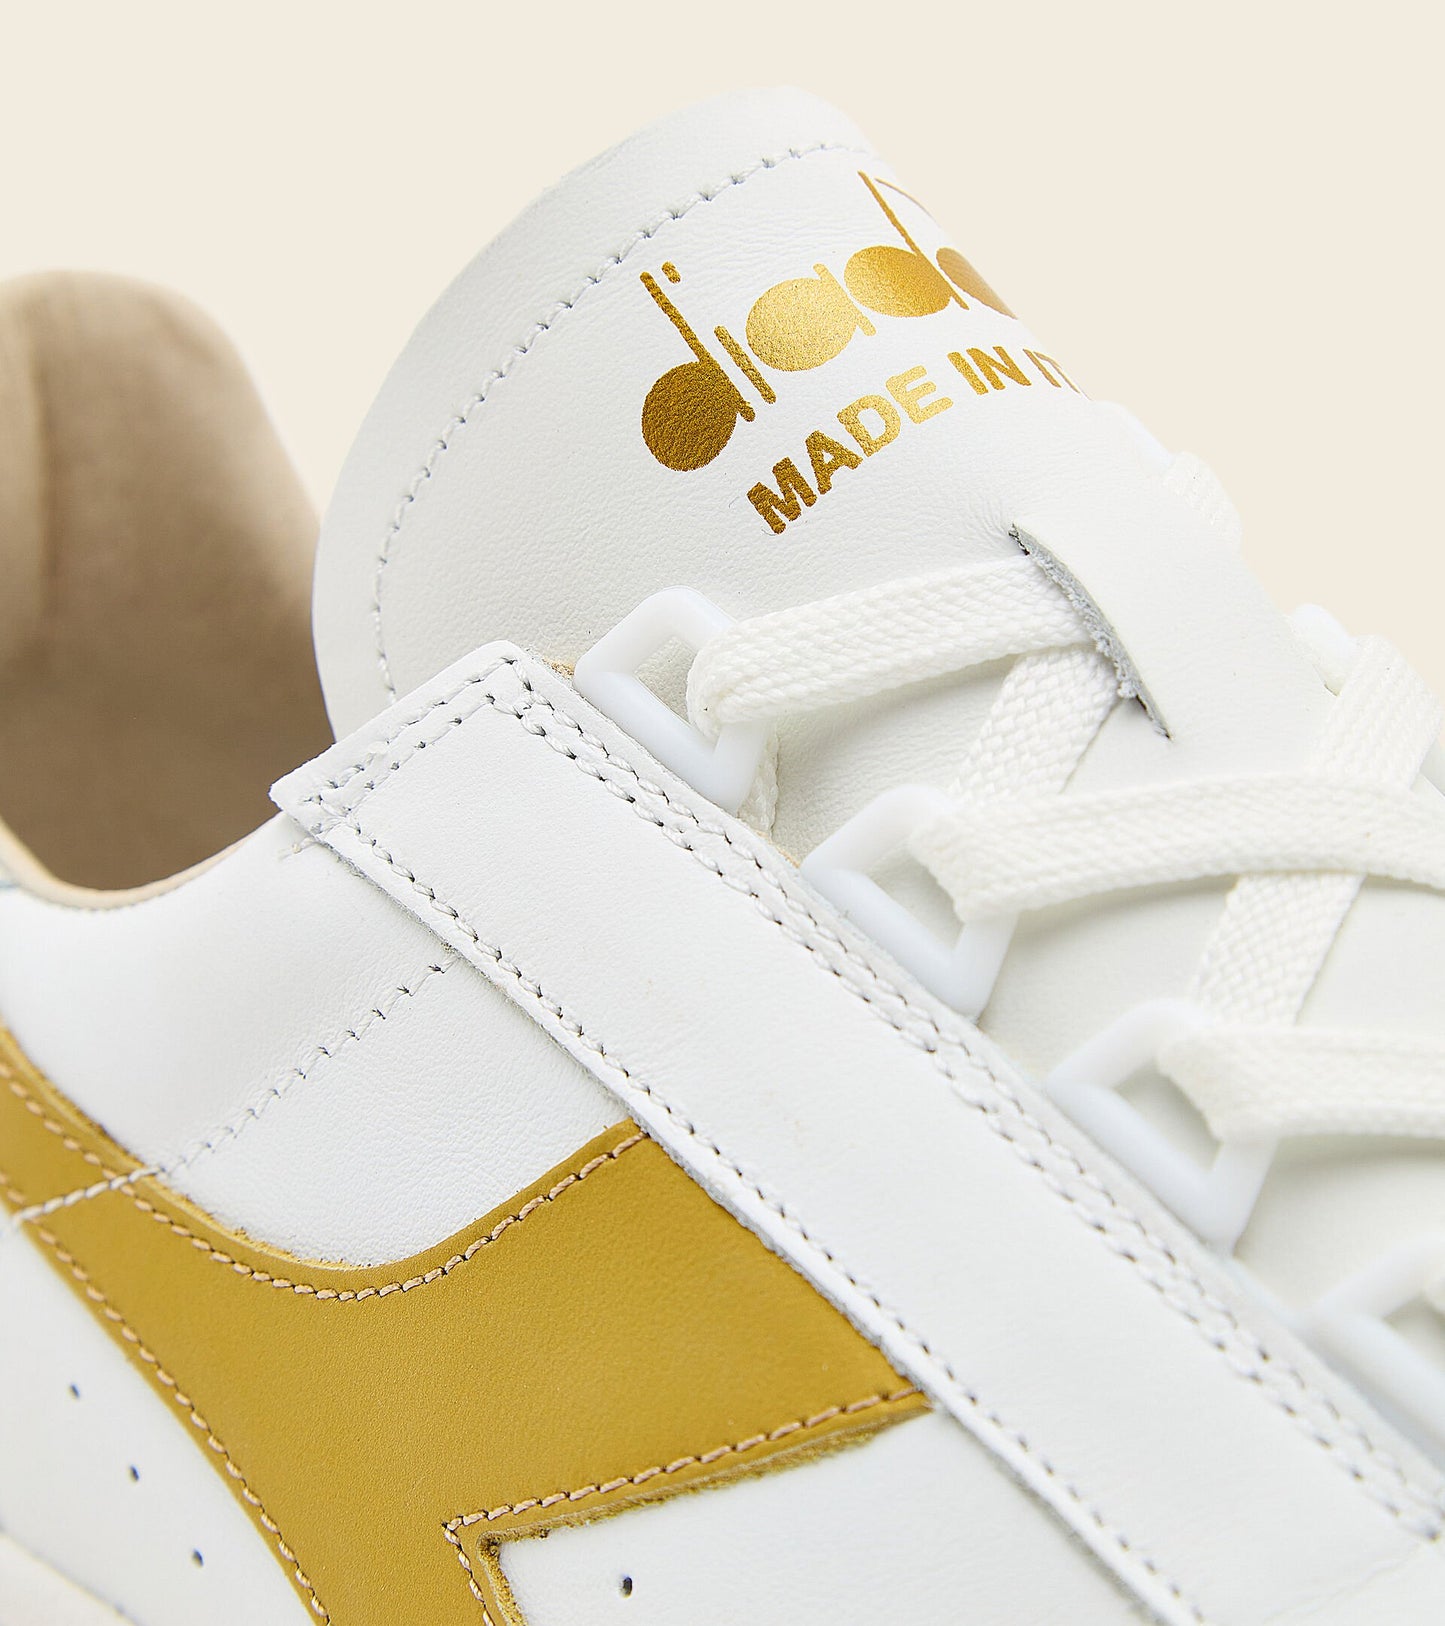 front angle view of white and gold B. elite h italia sport diadora shoe made in italy